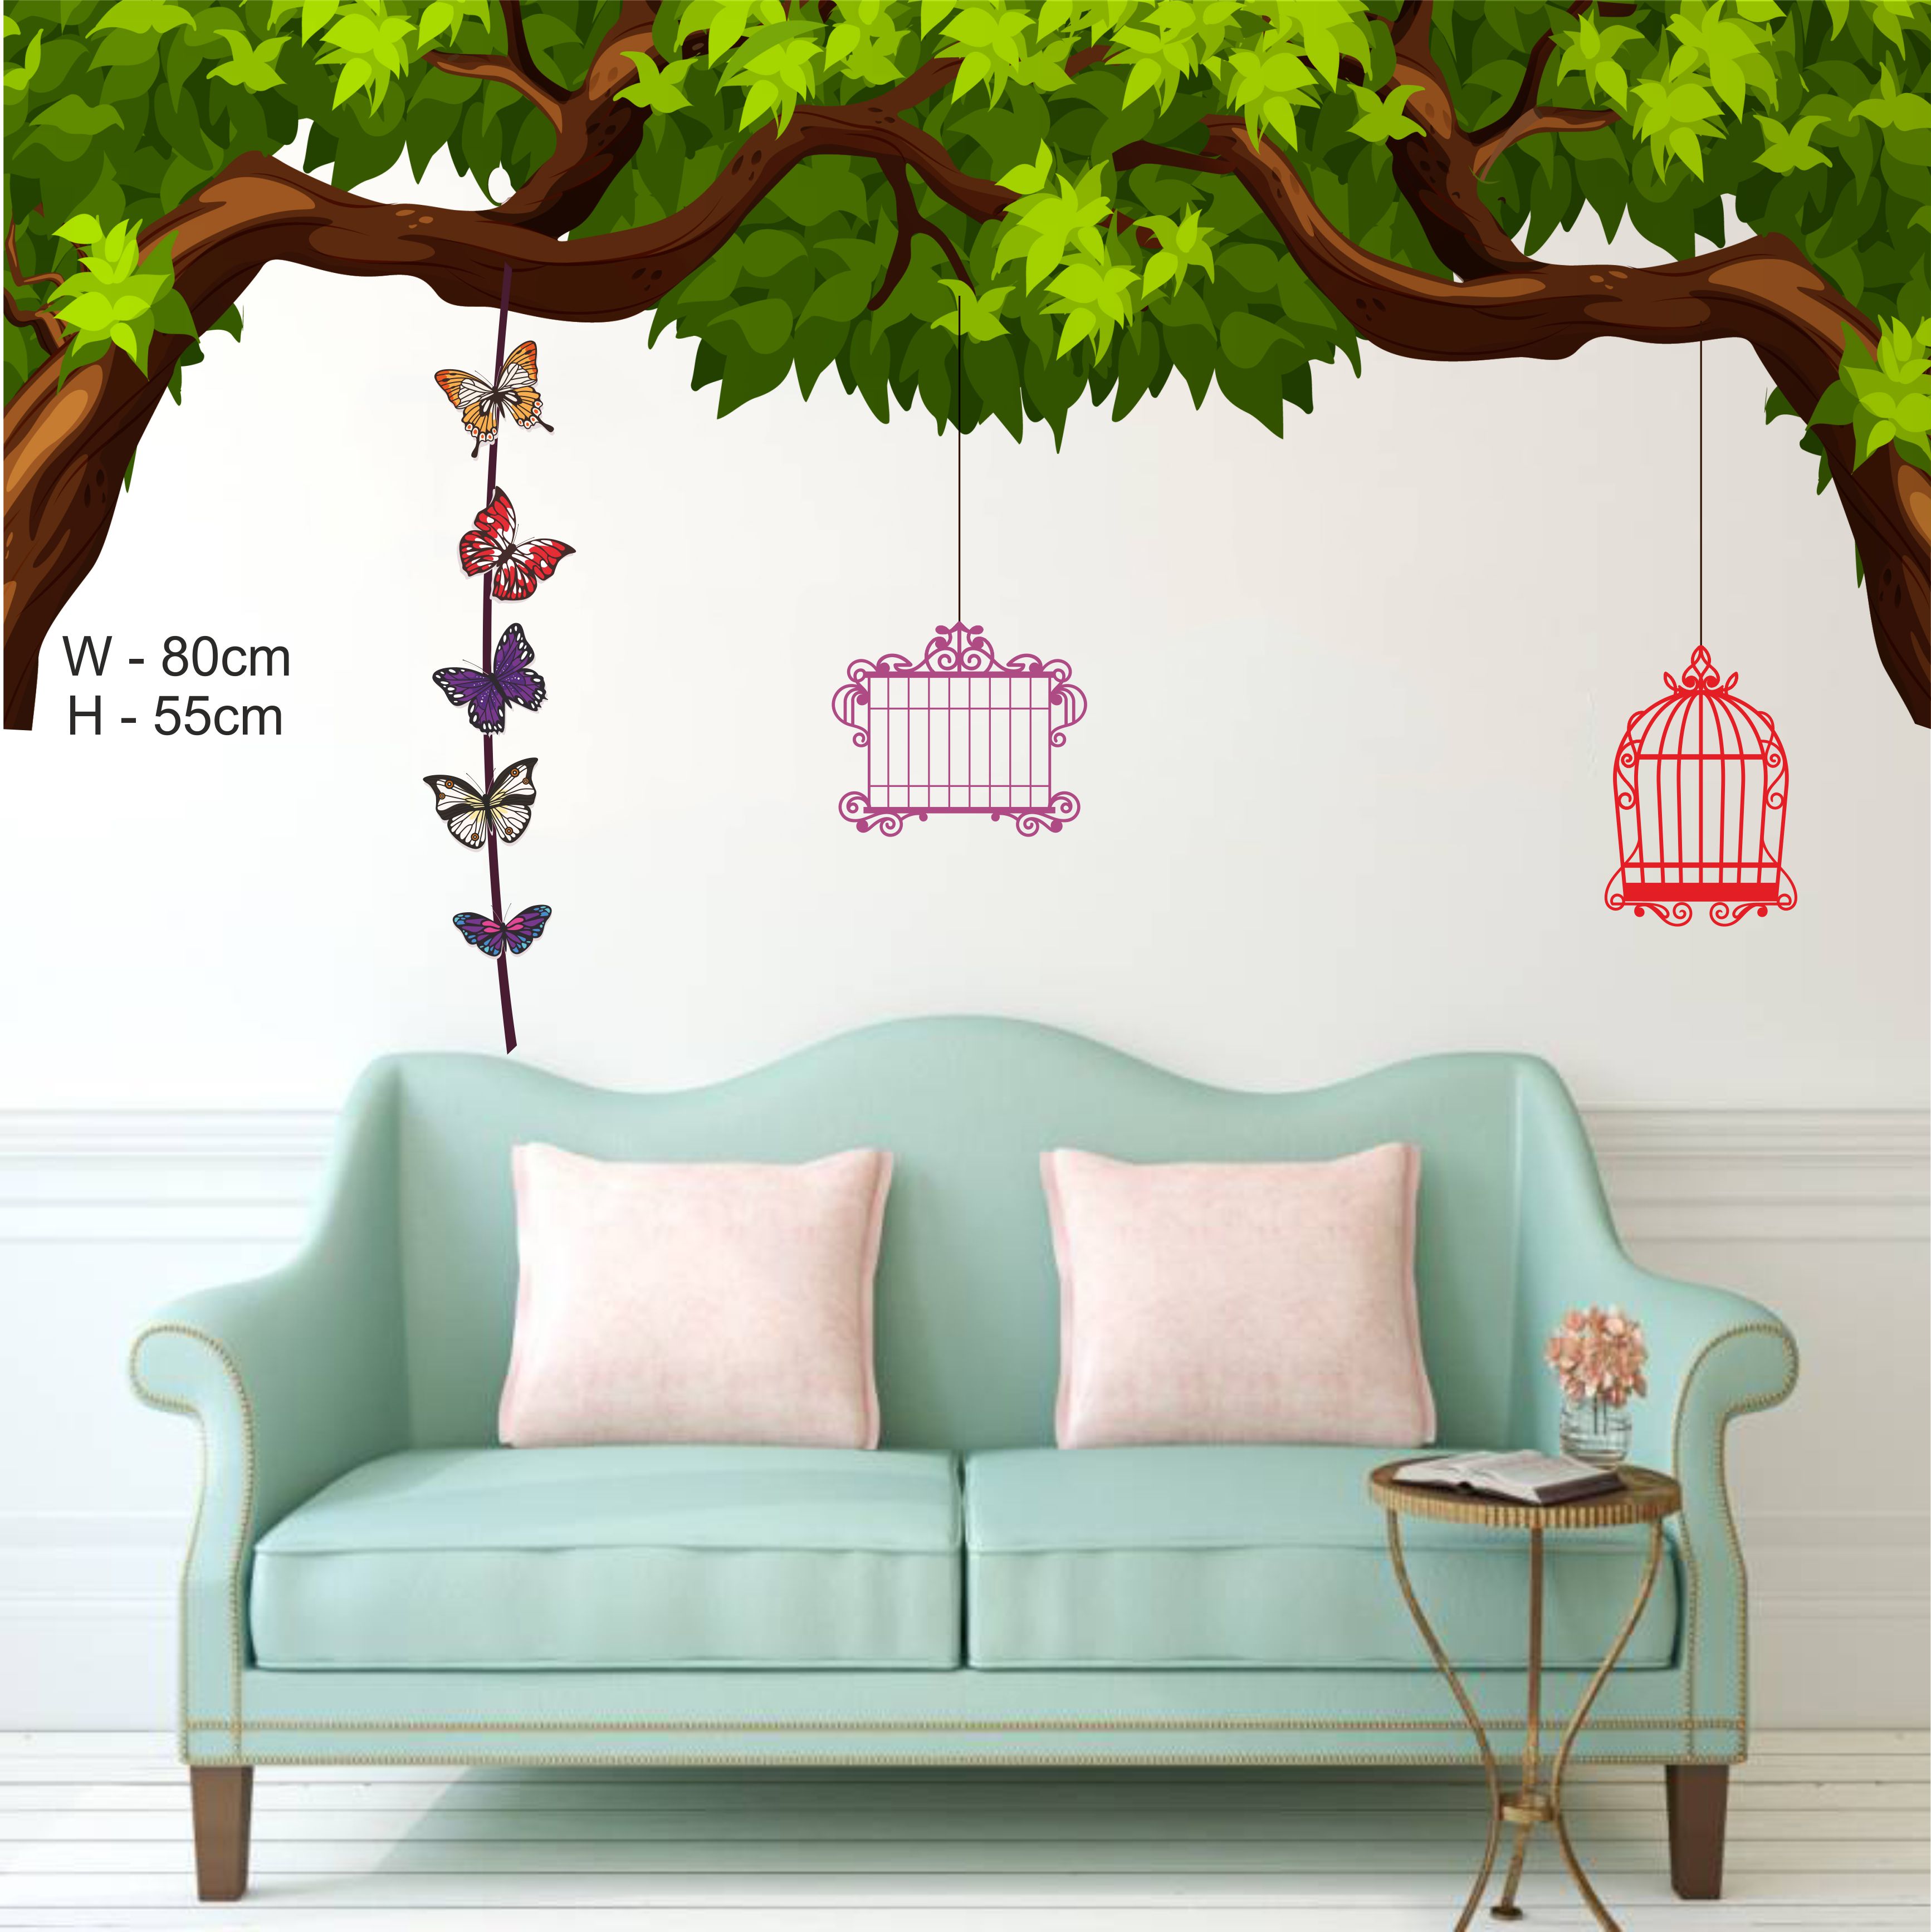 ORKA Nature Wall Decal Sticker 52  